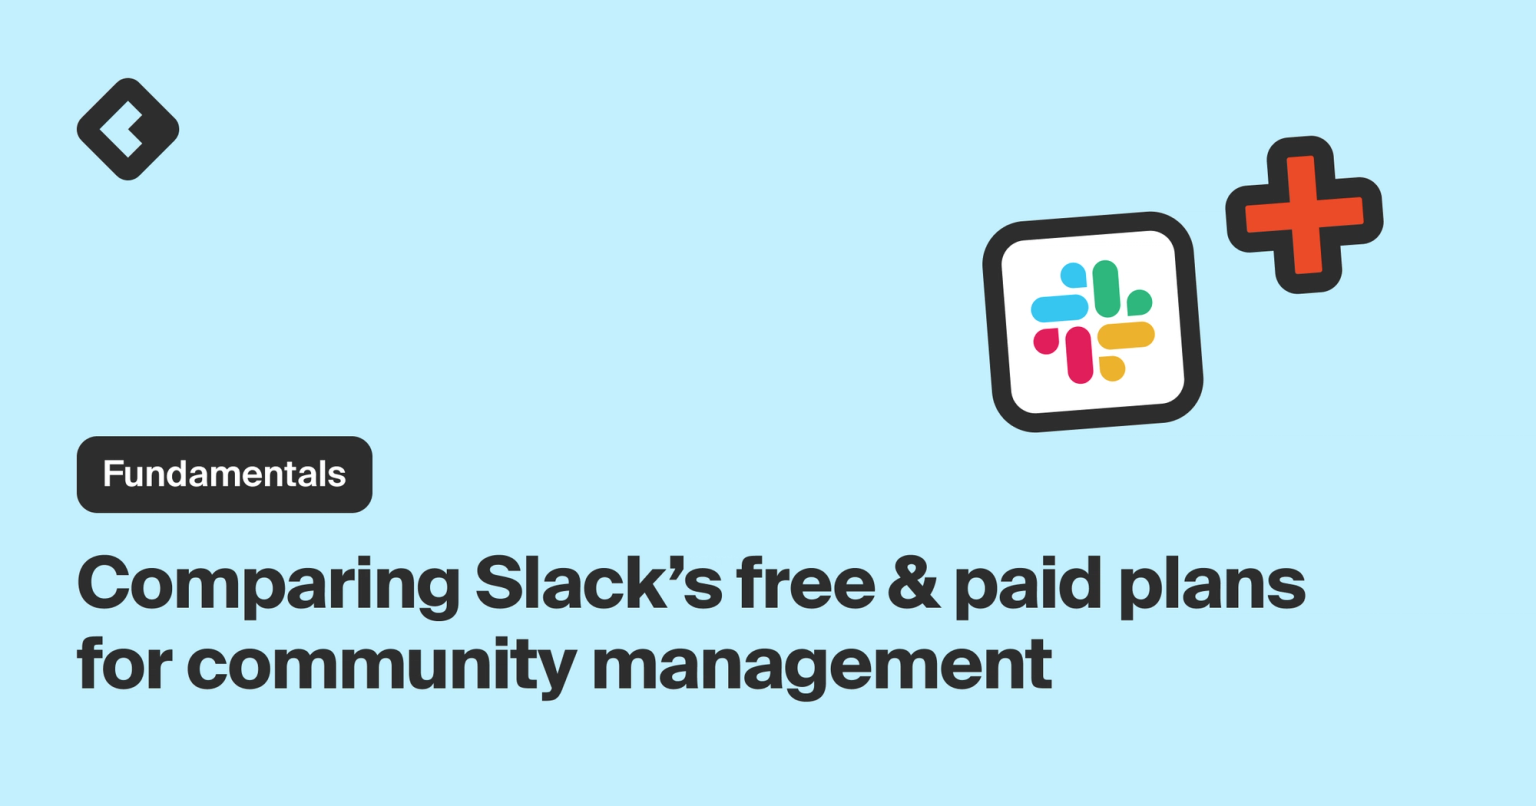 Comparing Slack's free and paid plans for community management